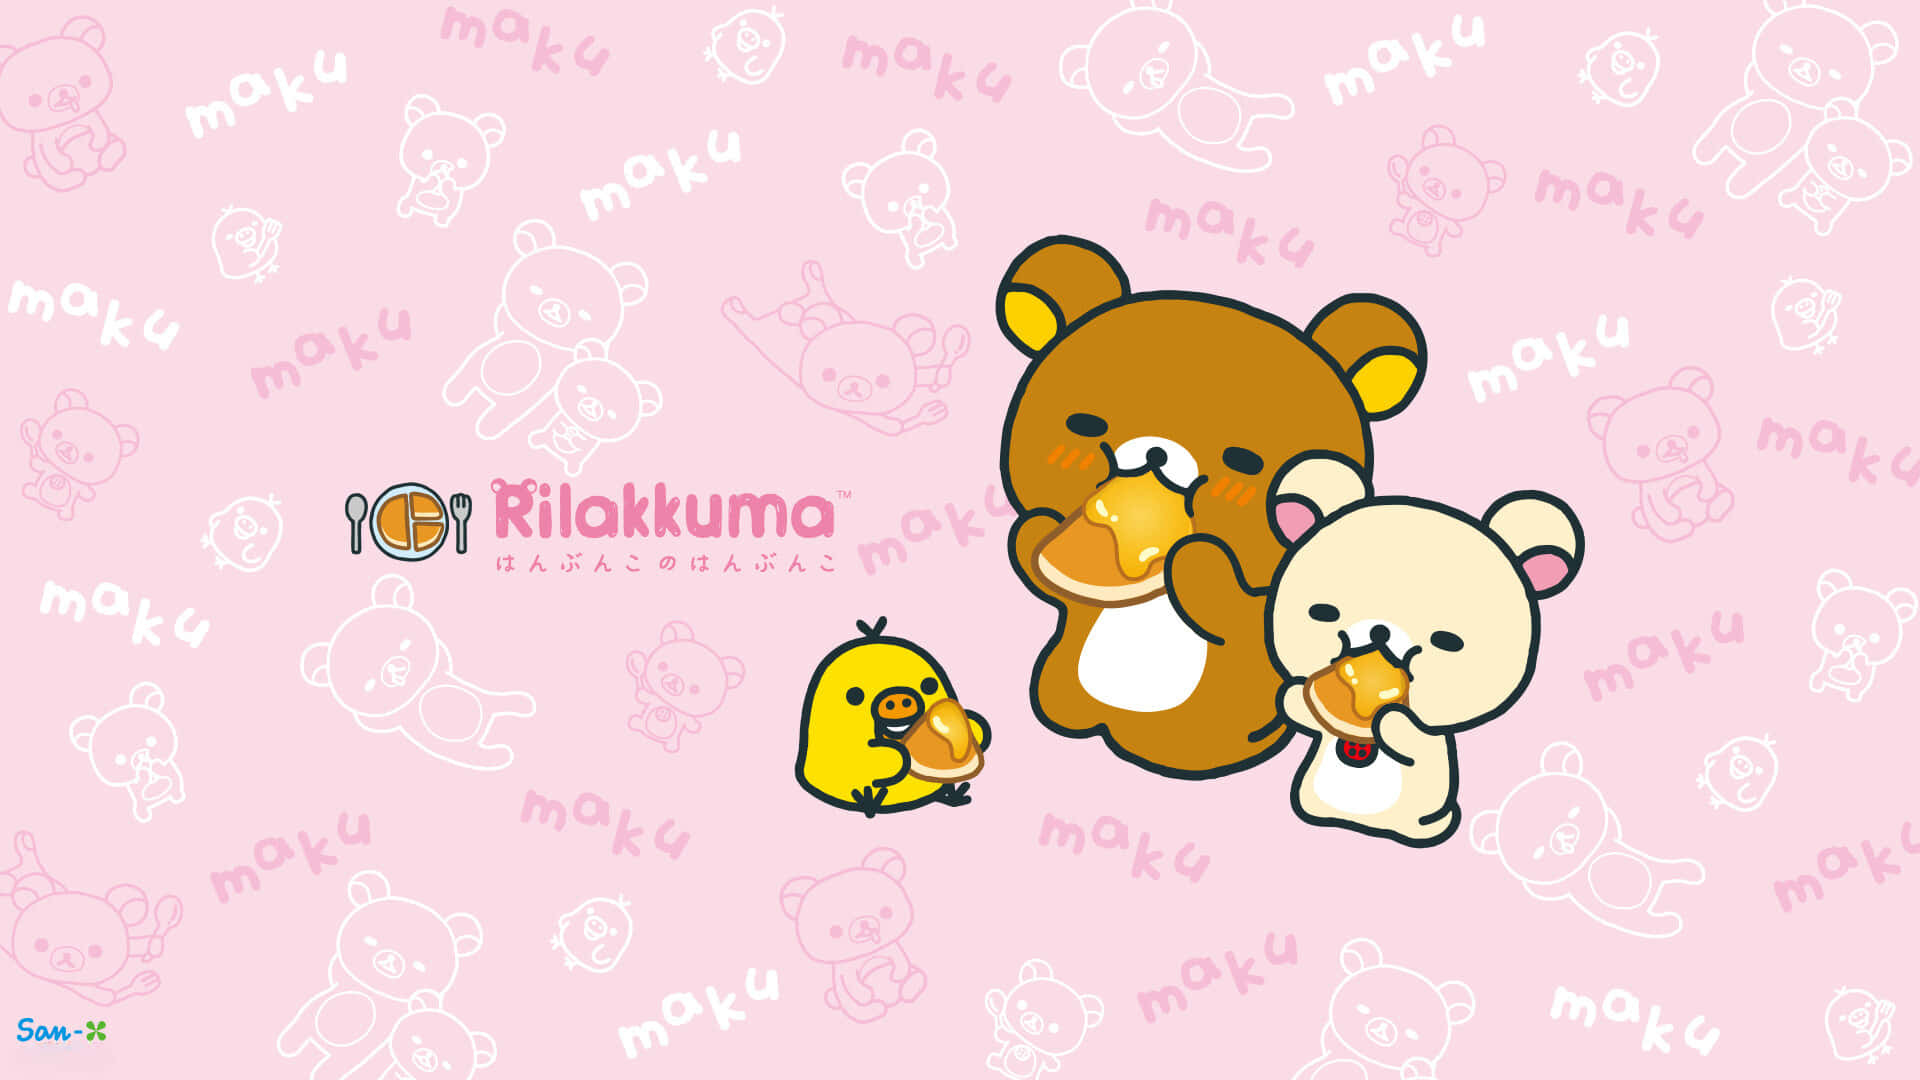 Celebrating classic Sanrio characters, forever smile-inducing and cute!